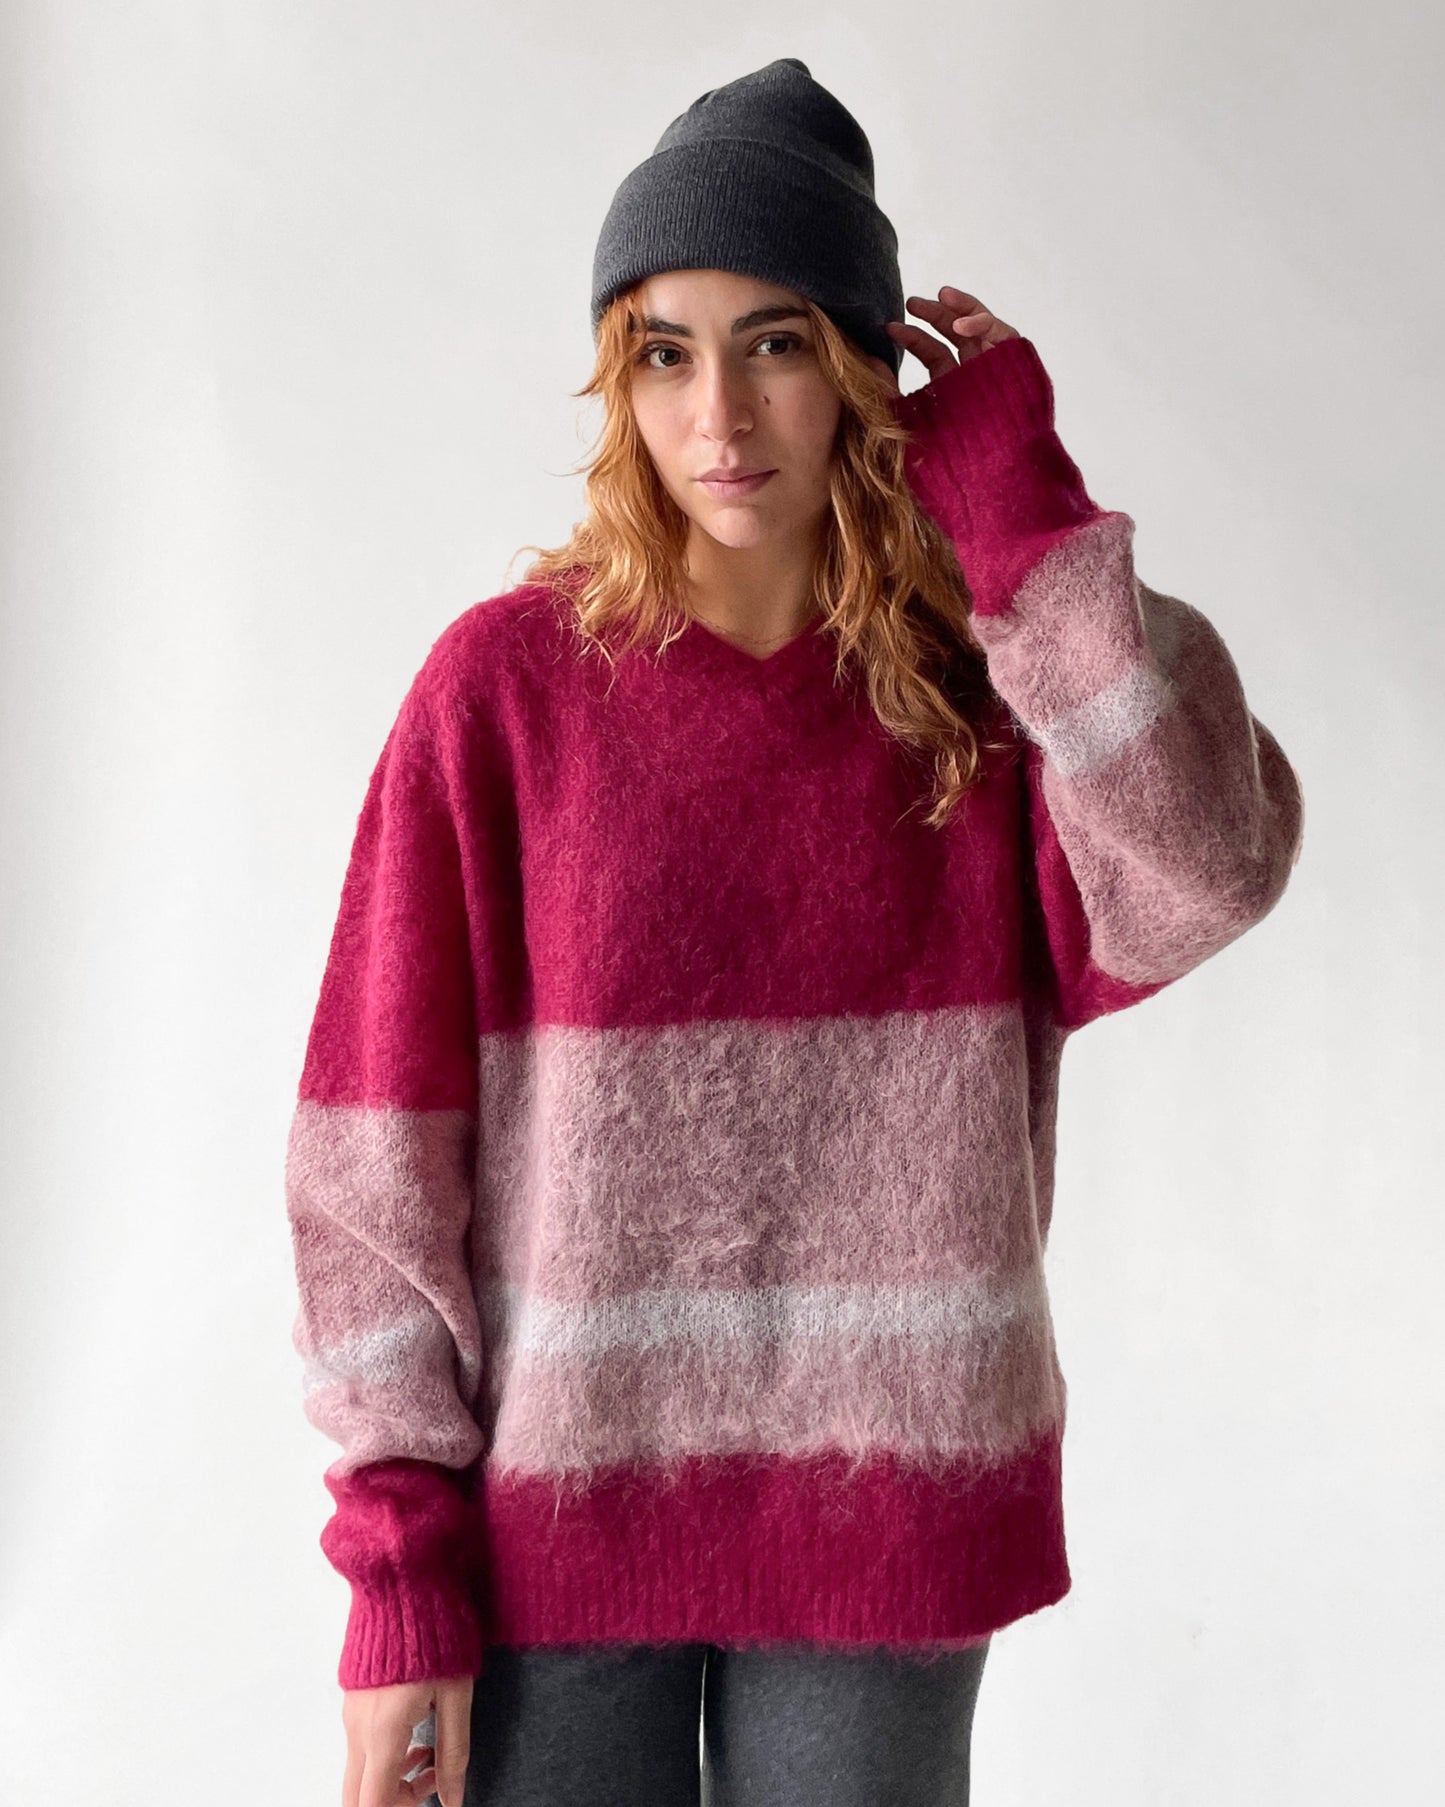 404 Art Inspired Mohair Sweater  Untitled - 3